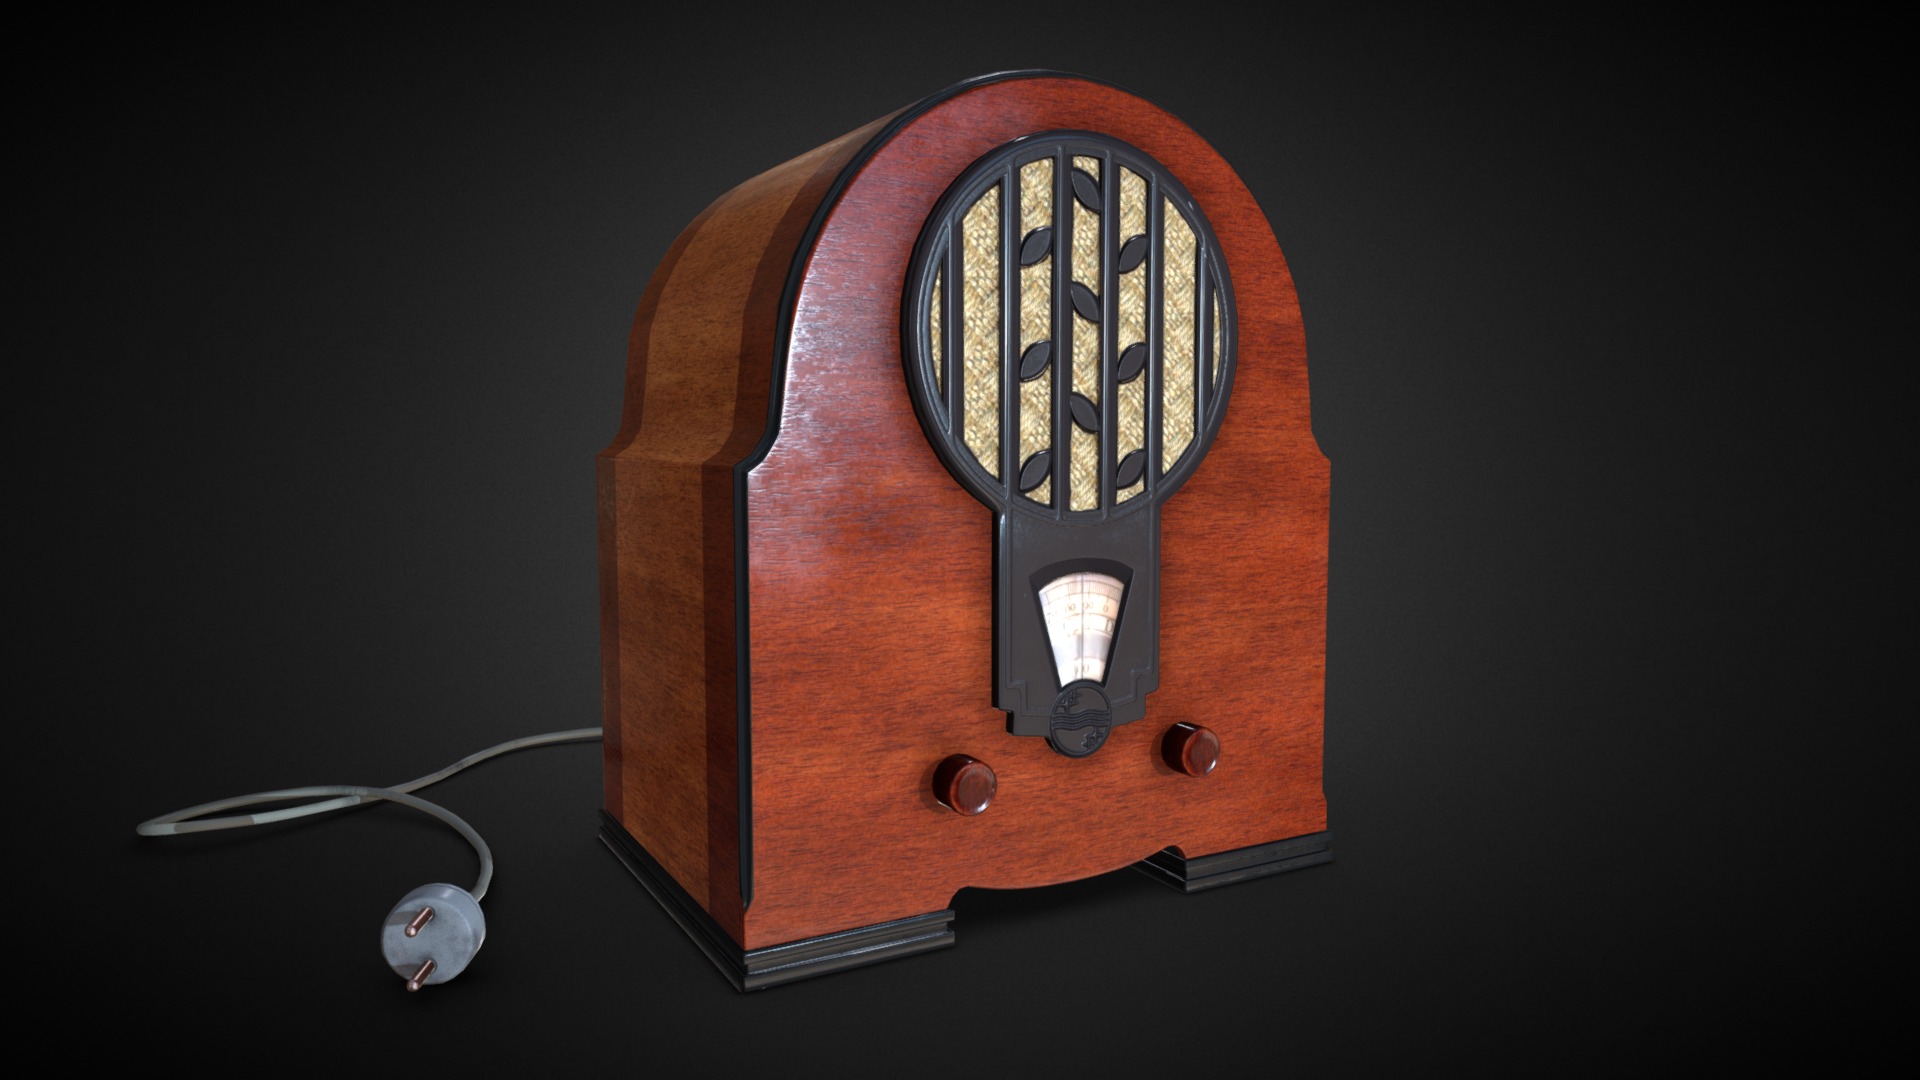 3D model 1933 Philips 634A Vintage Radio - This is a 3D model of the 1933 Philips 634A Vintage Radio. The 3D model is about a red and black telephone.